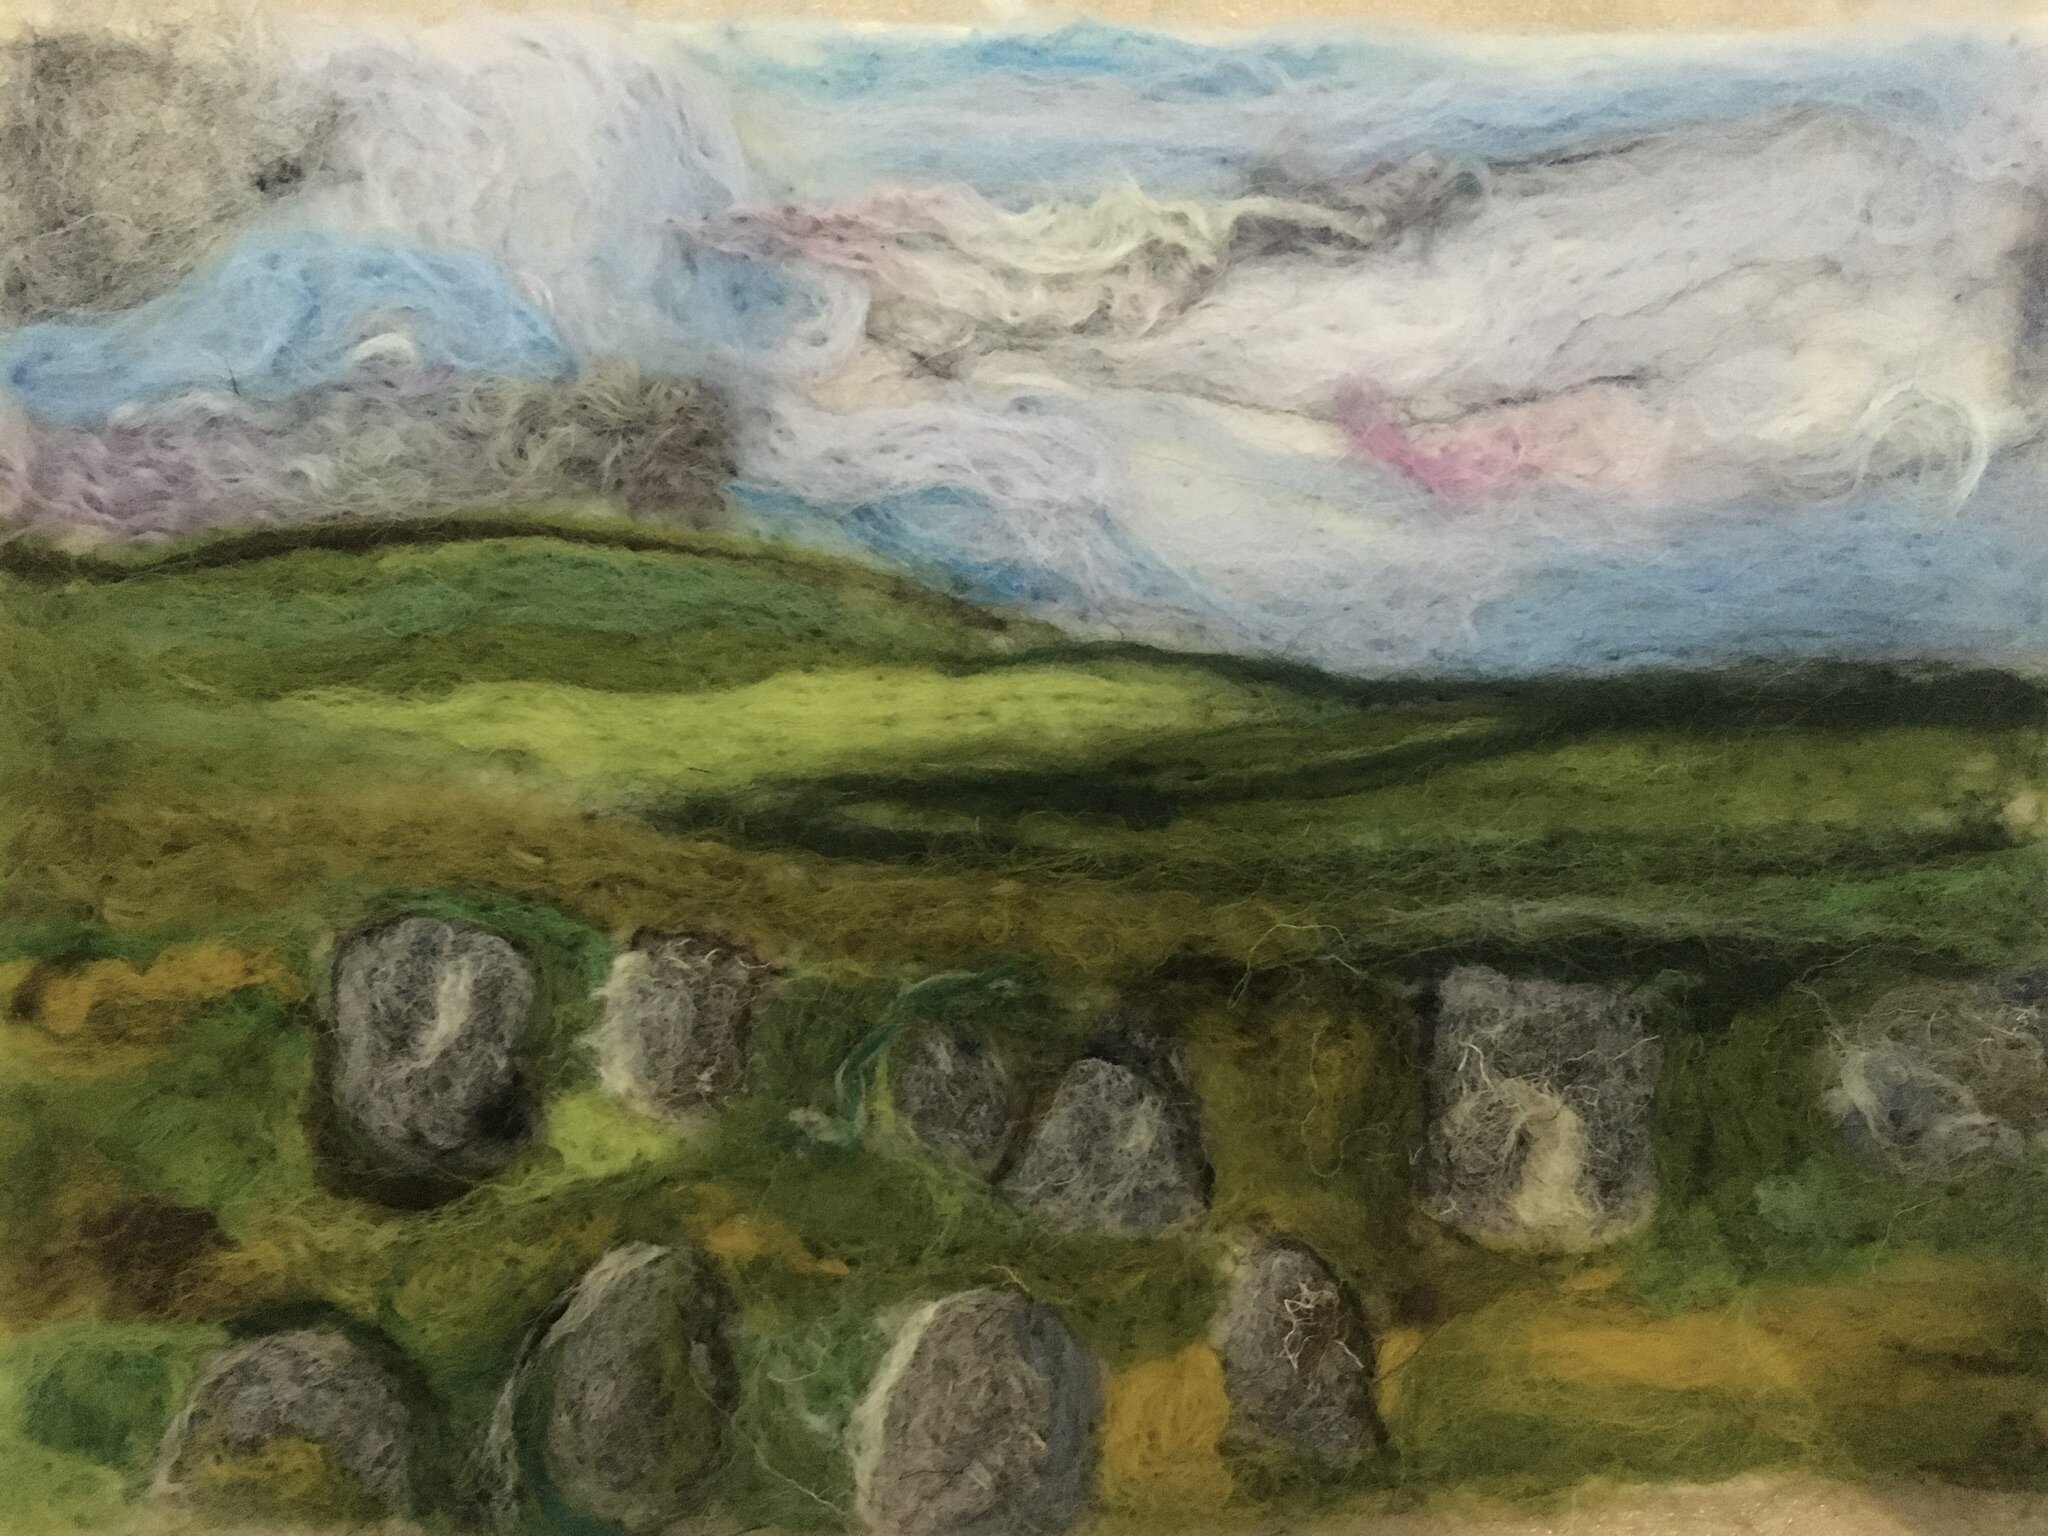 Grey Wethers Standing Stone Circle